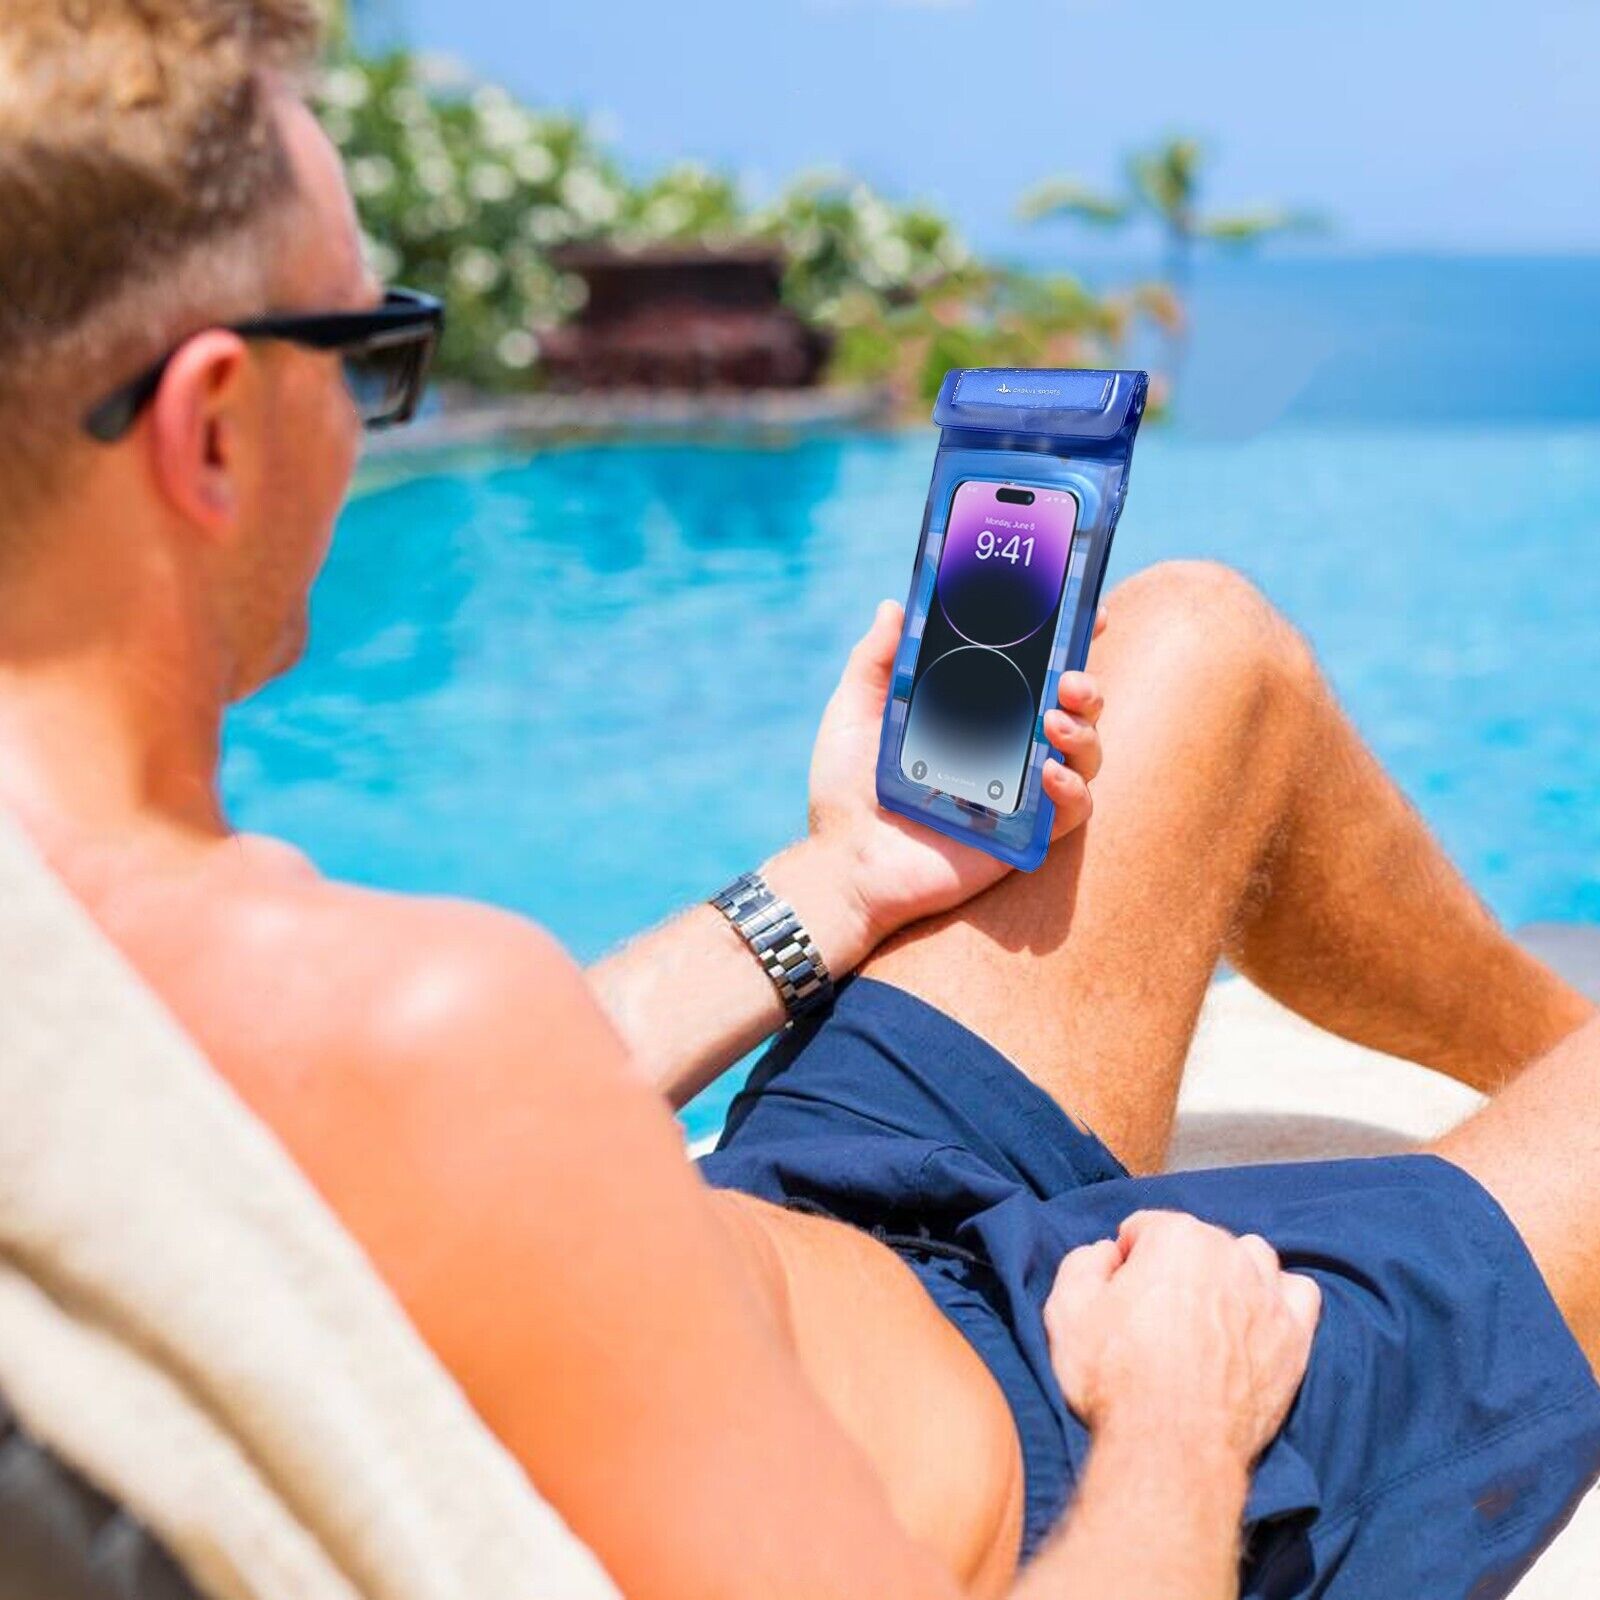 Male using his phone inside of a waterproof pouch relaxing at poolside